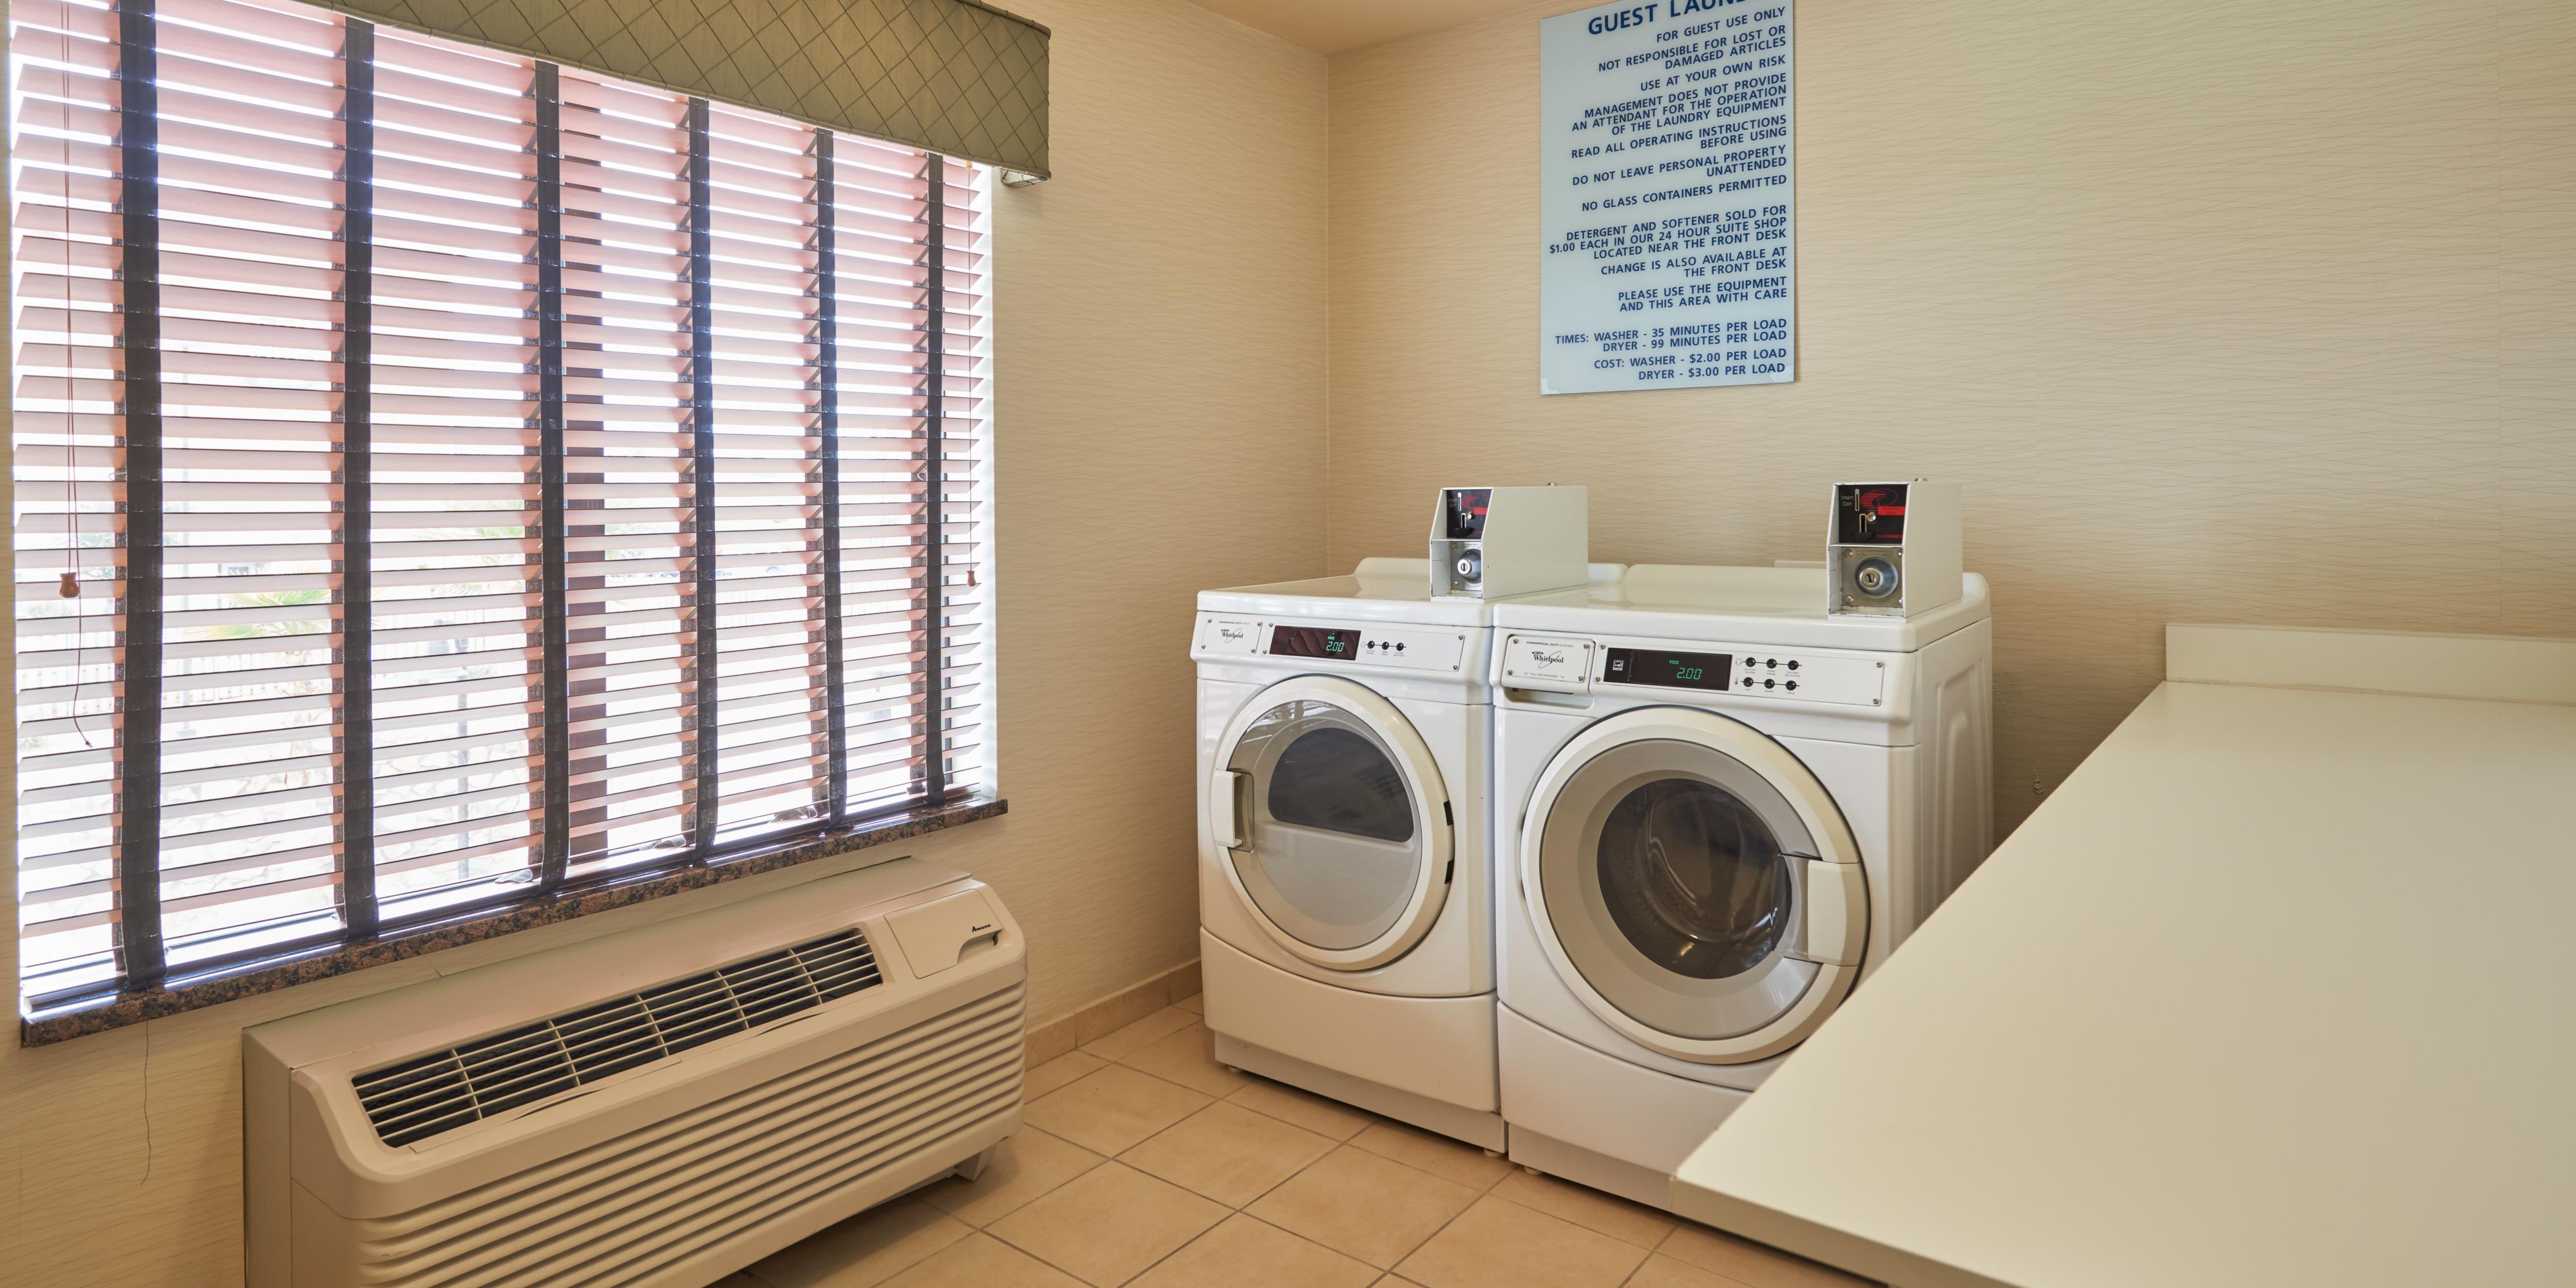 Simplify your travel plans at our hotel in El Paso, TX. Start your day in style with free toiletries and clothes fresh from our laundry facility.